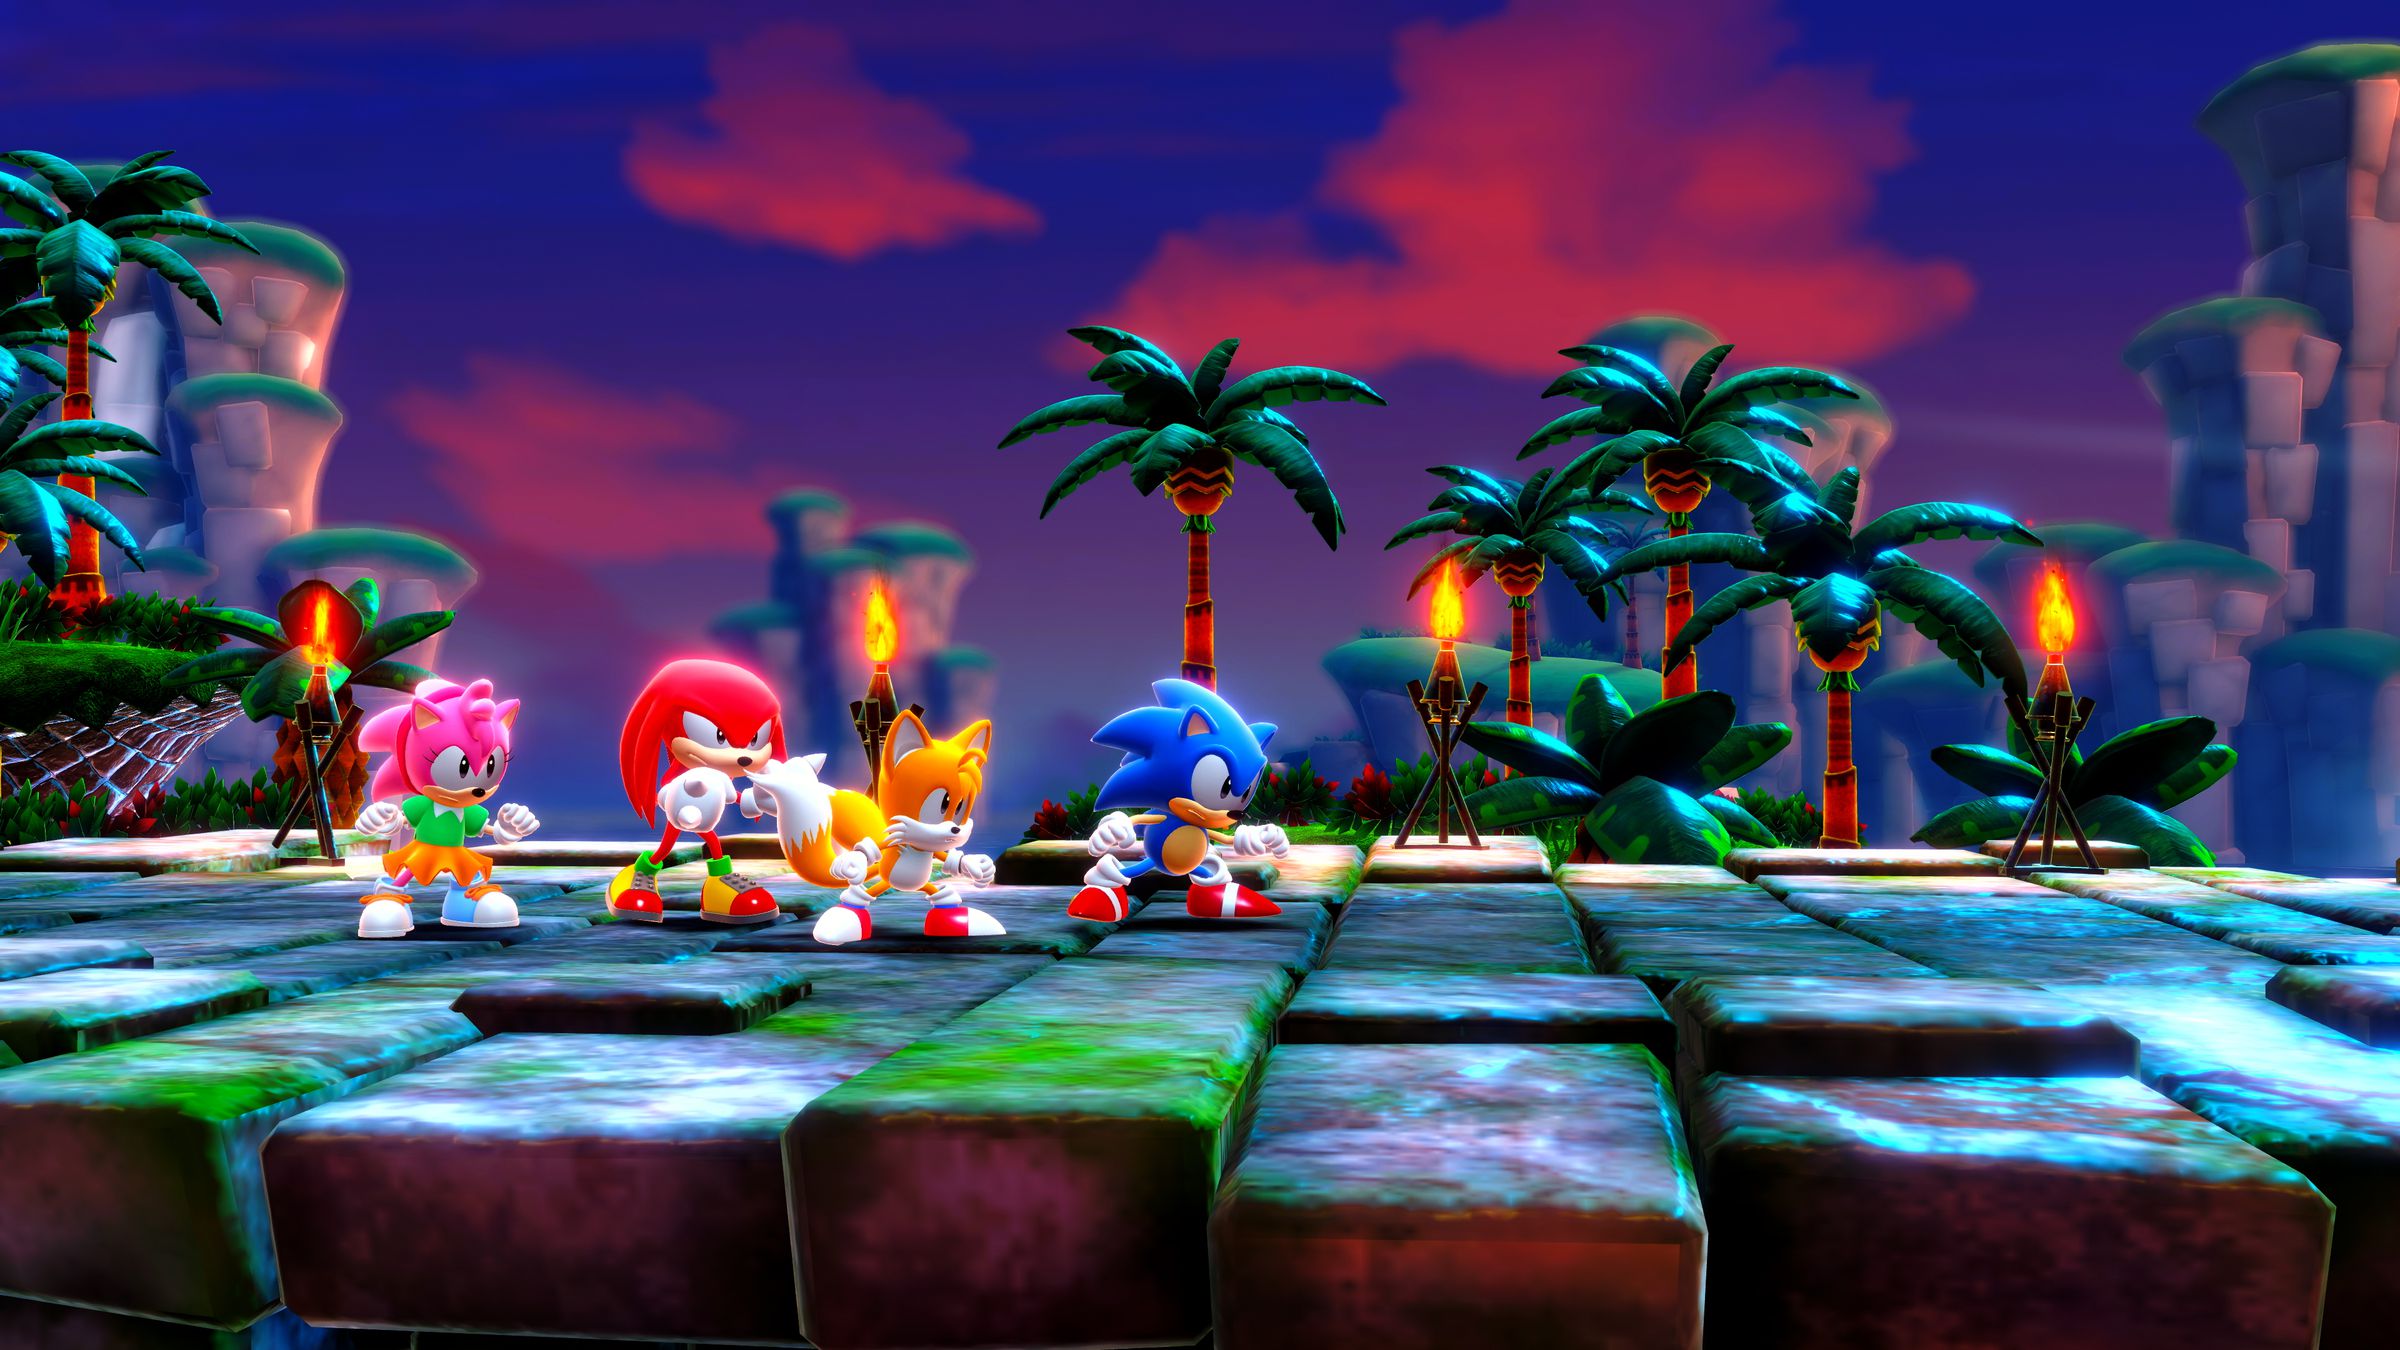 Screenshot from Sonic Frontiers featuring Amy, Knuckles, Tails and Sonic standing together in a tropical themed zone with lit tiki torches.